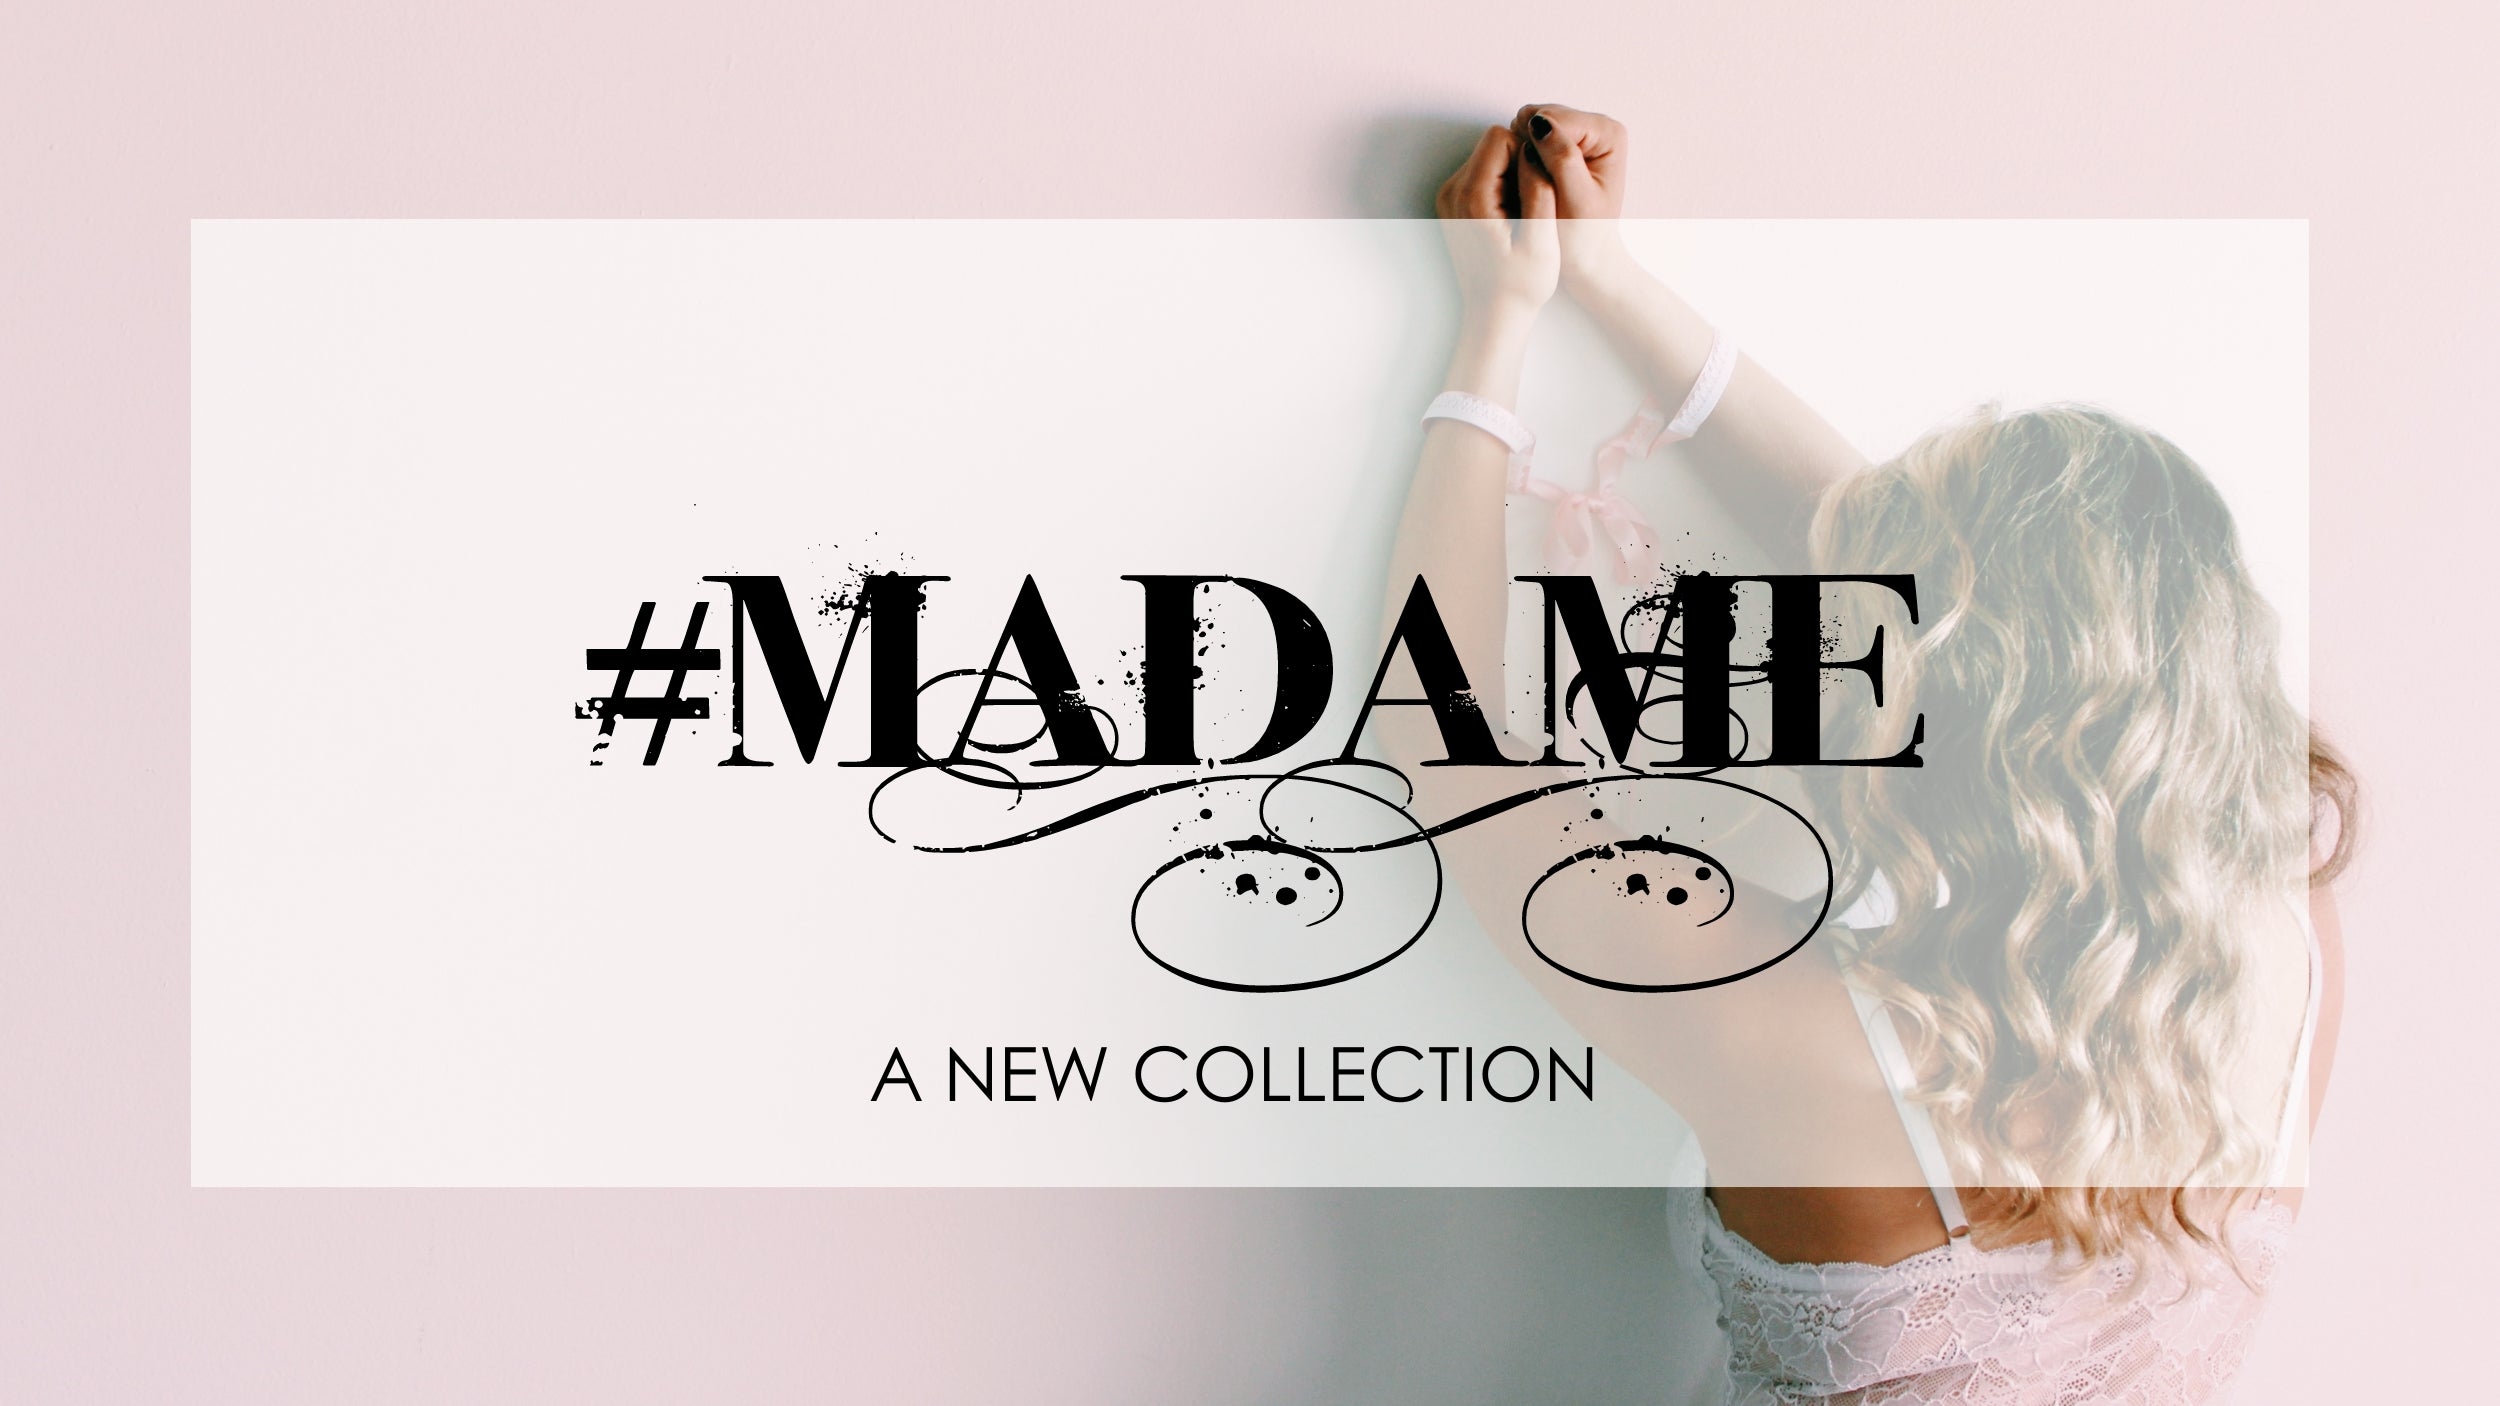 Meet the Madame Collection of Lacy Intimates